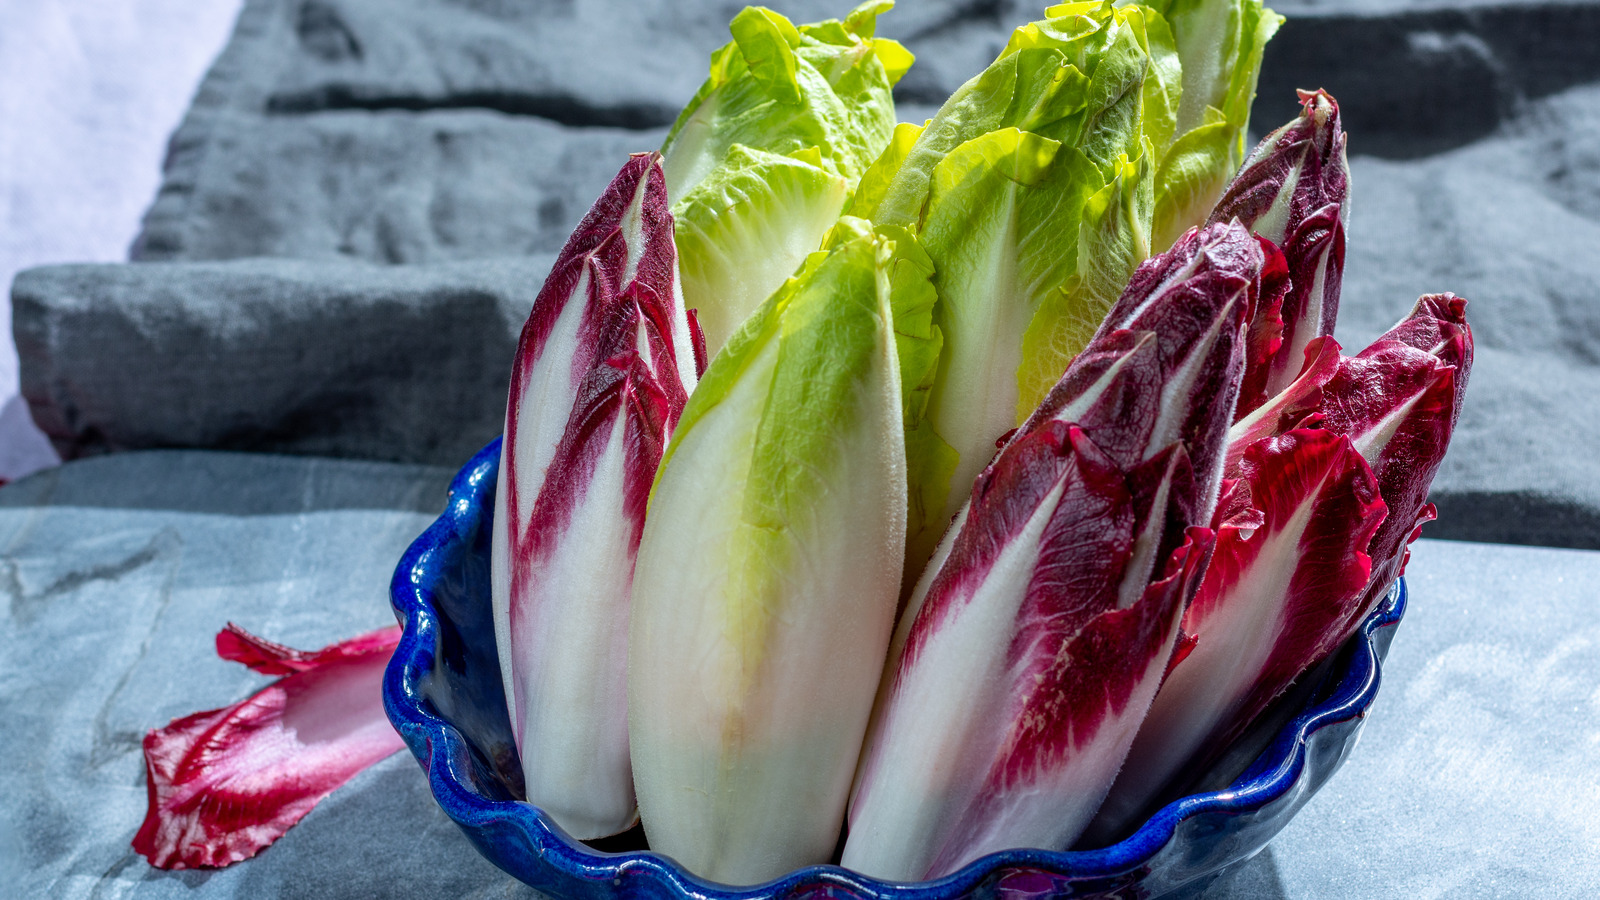 What Is Chicory And How Do You Use It?